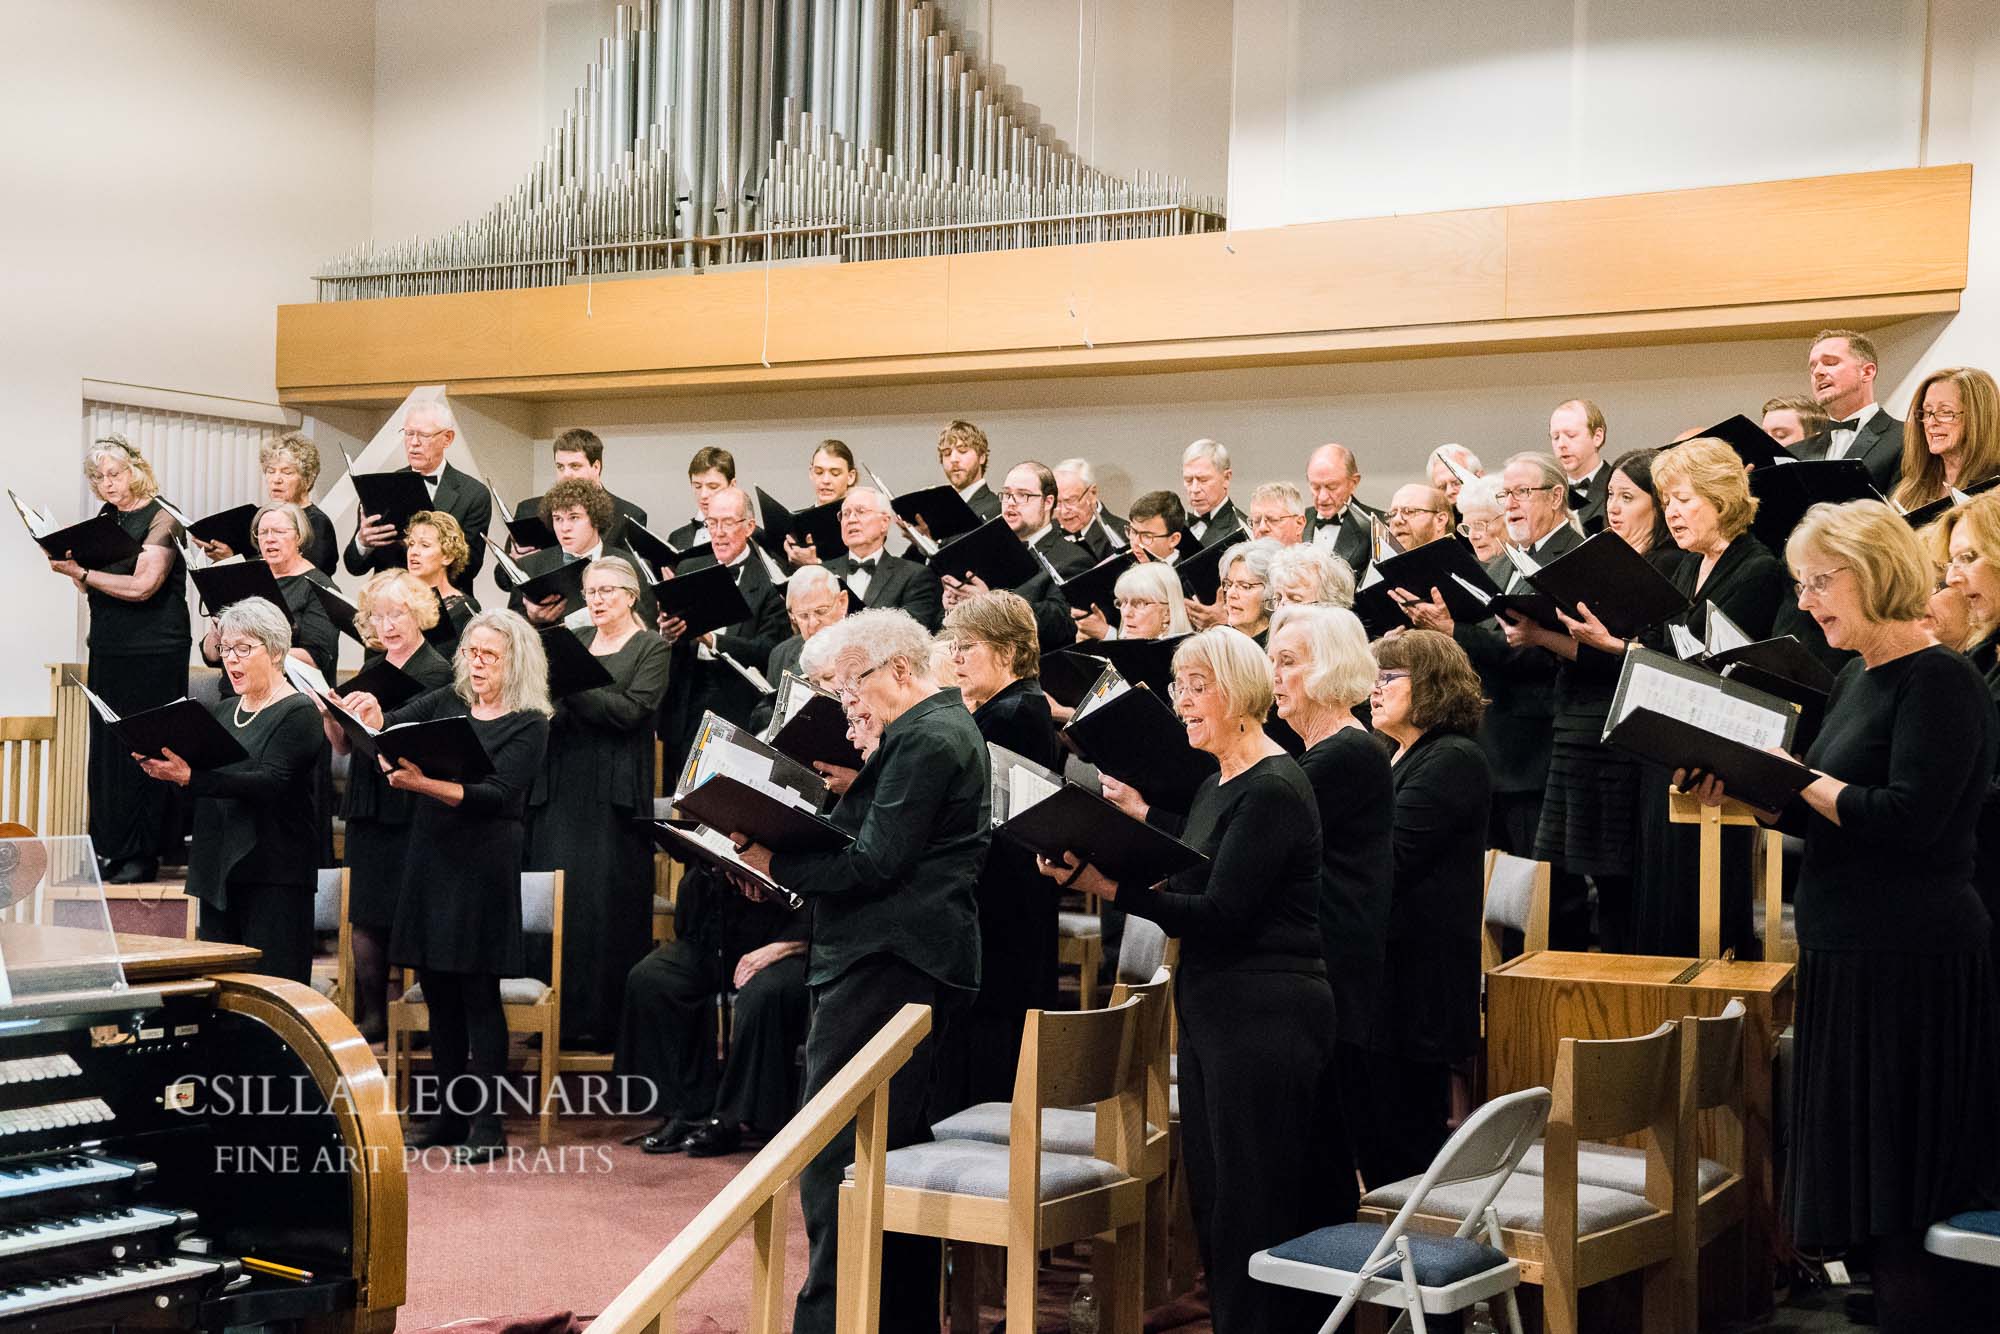 Grand junction photographer shows images of Good Friday concert (12)